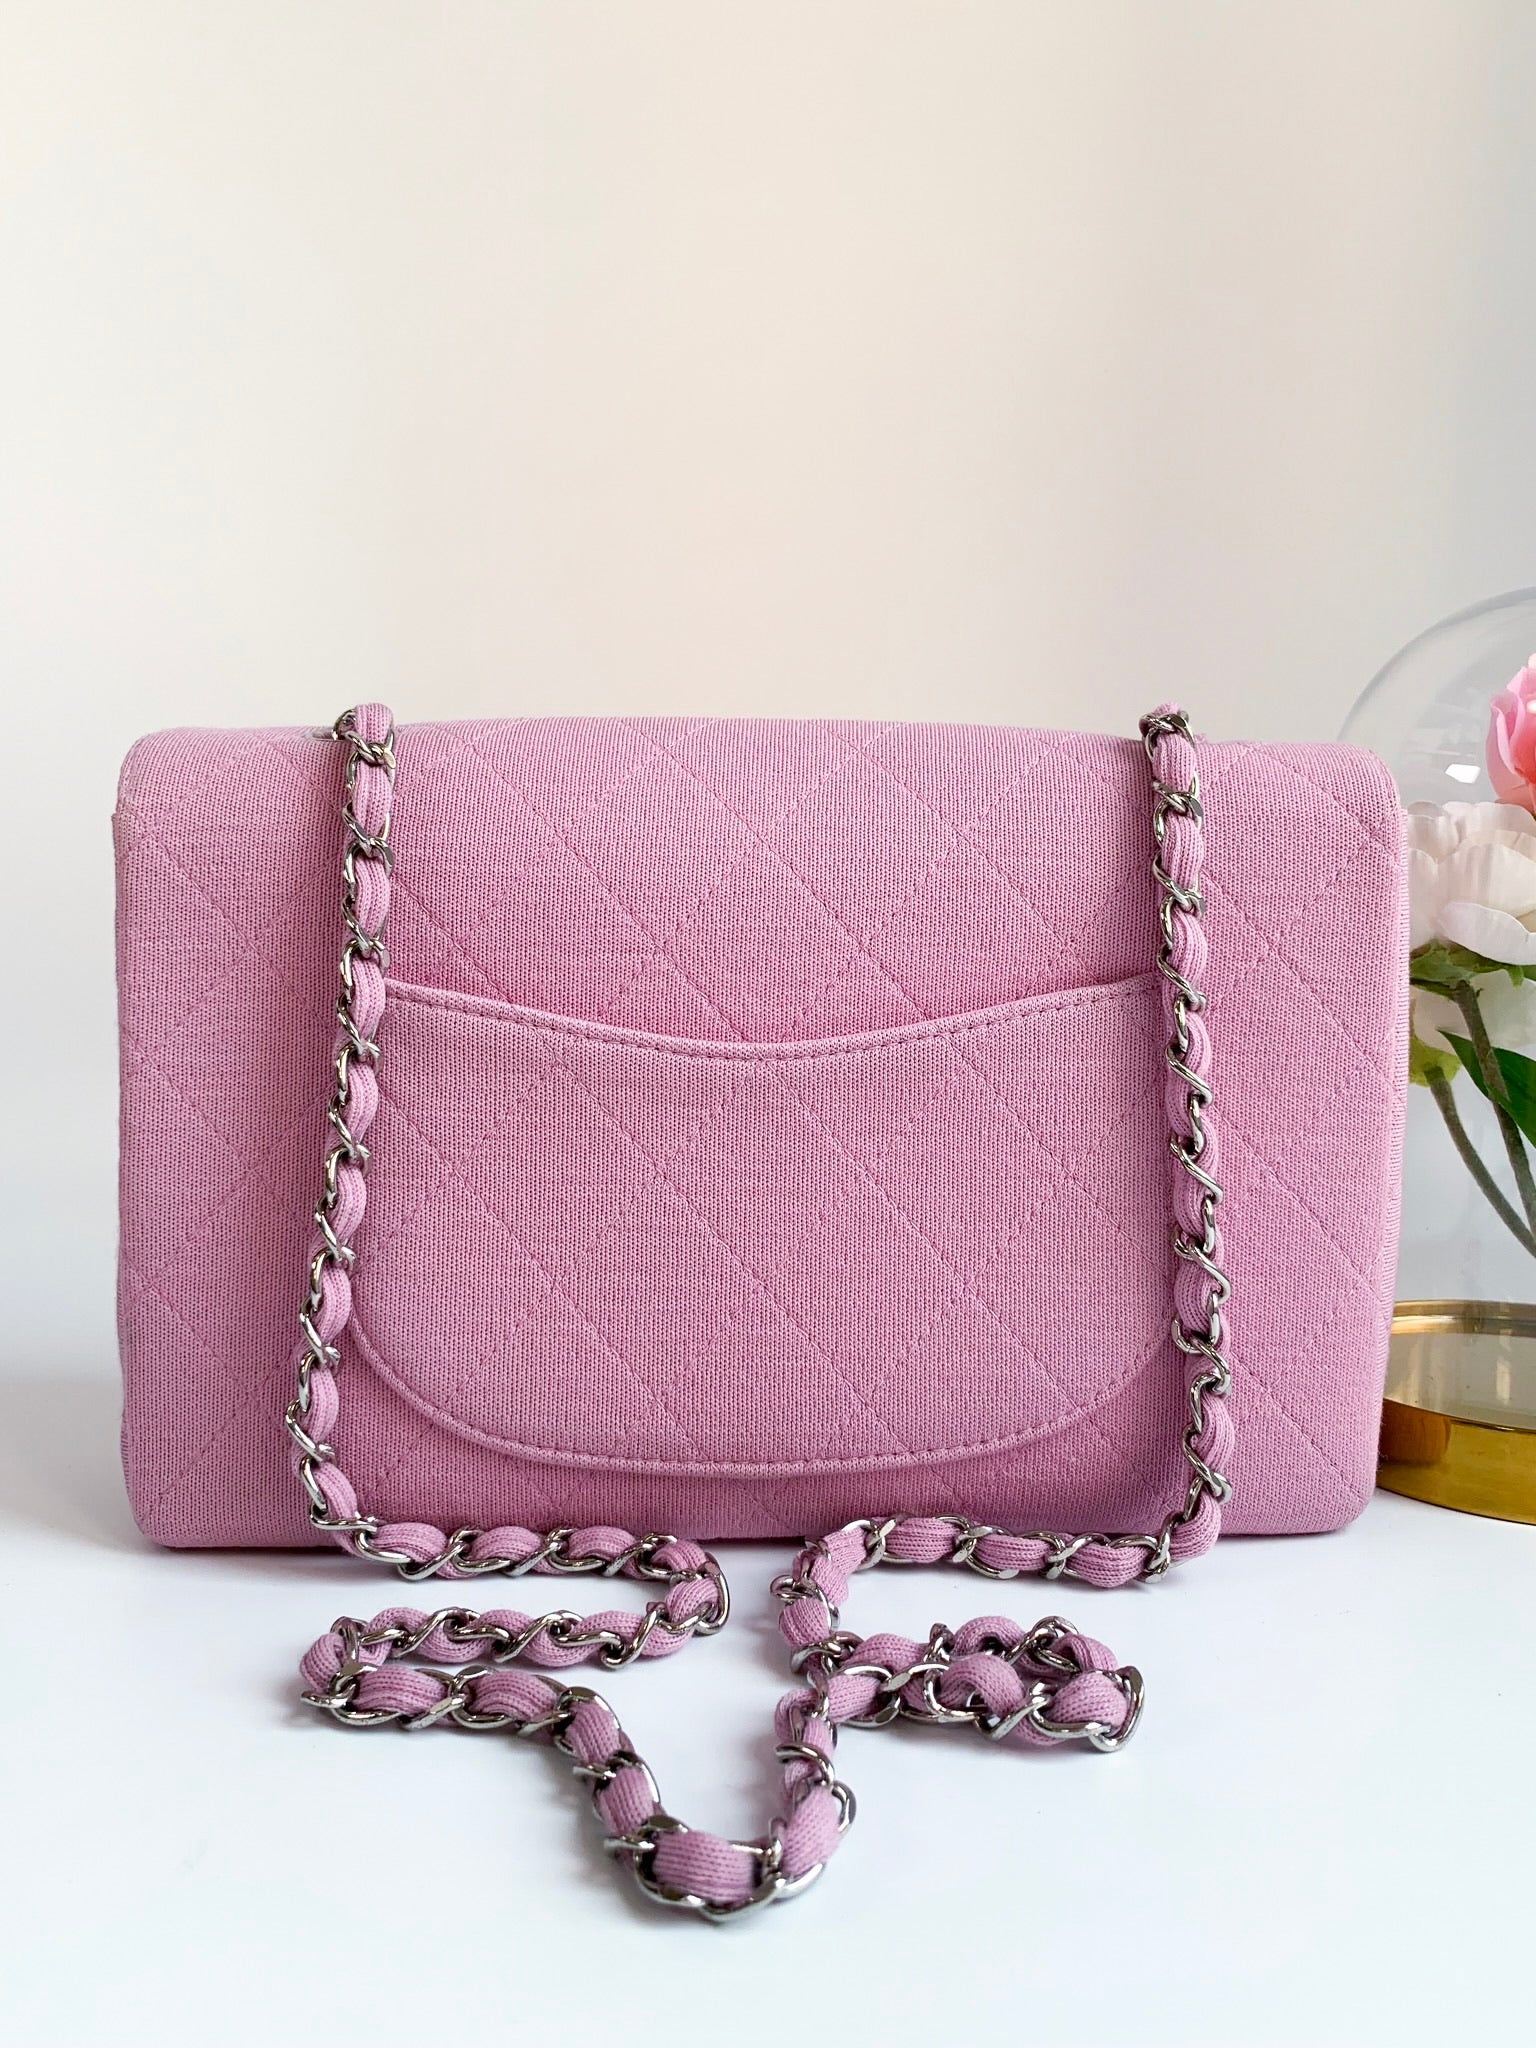 Chanel Classic Medium Double Flap Bag In Pink Quilted Jersey And